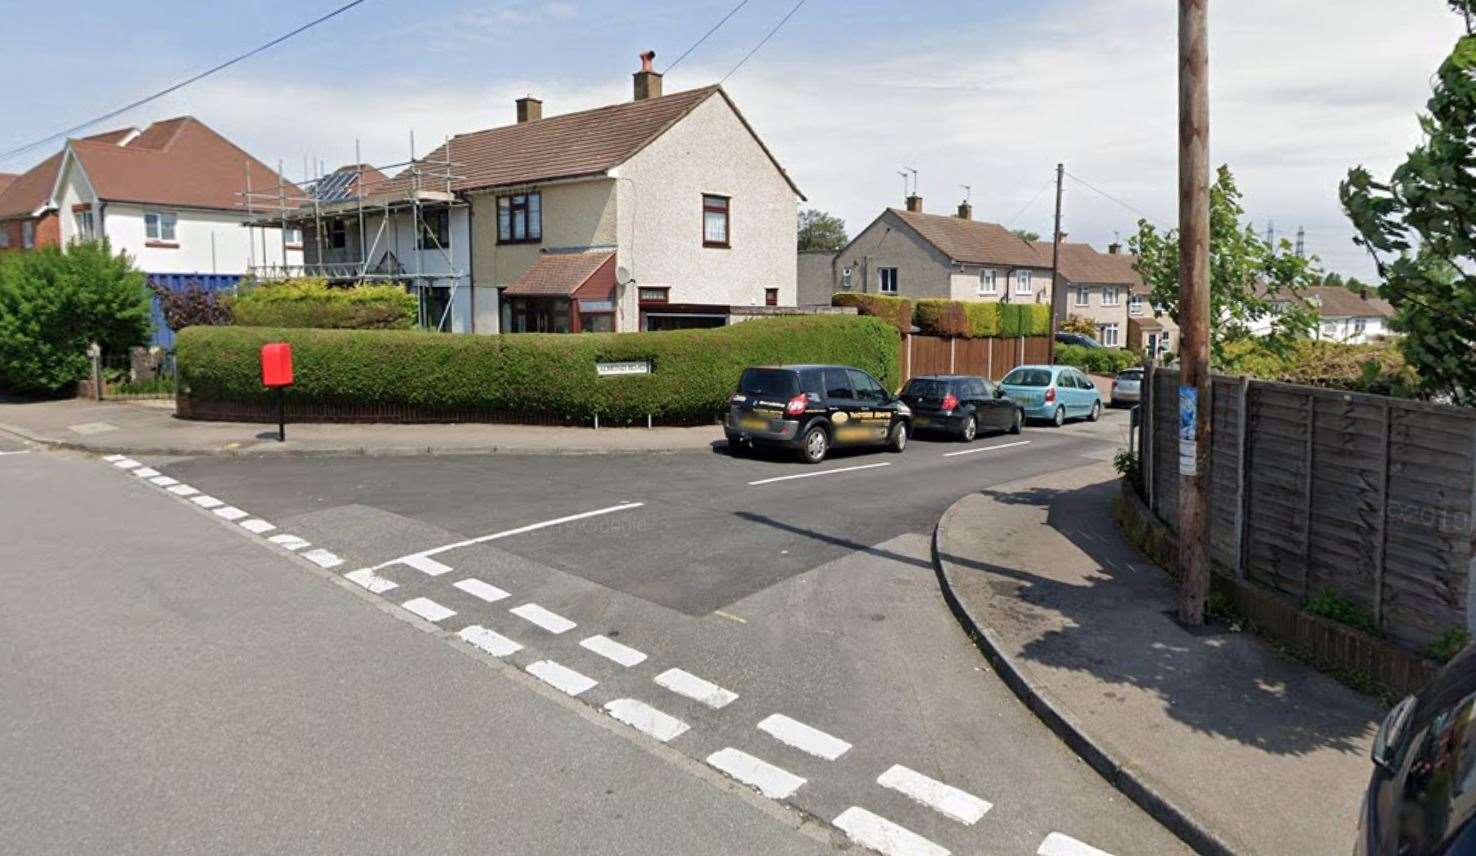 Plans for double yellows on the junction of St Johns Road and Almond Road are due to be discussed. Picture: Google Maps